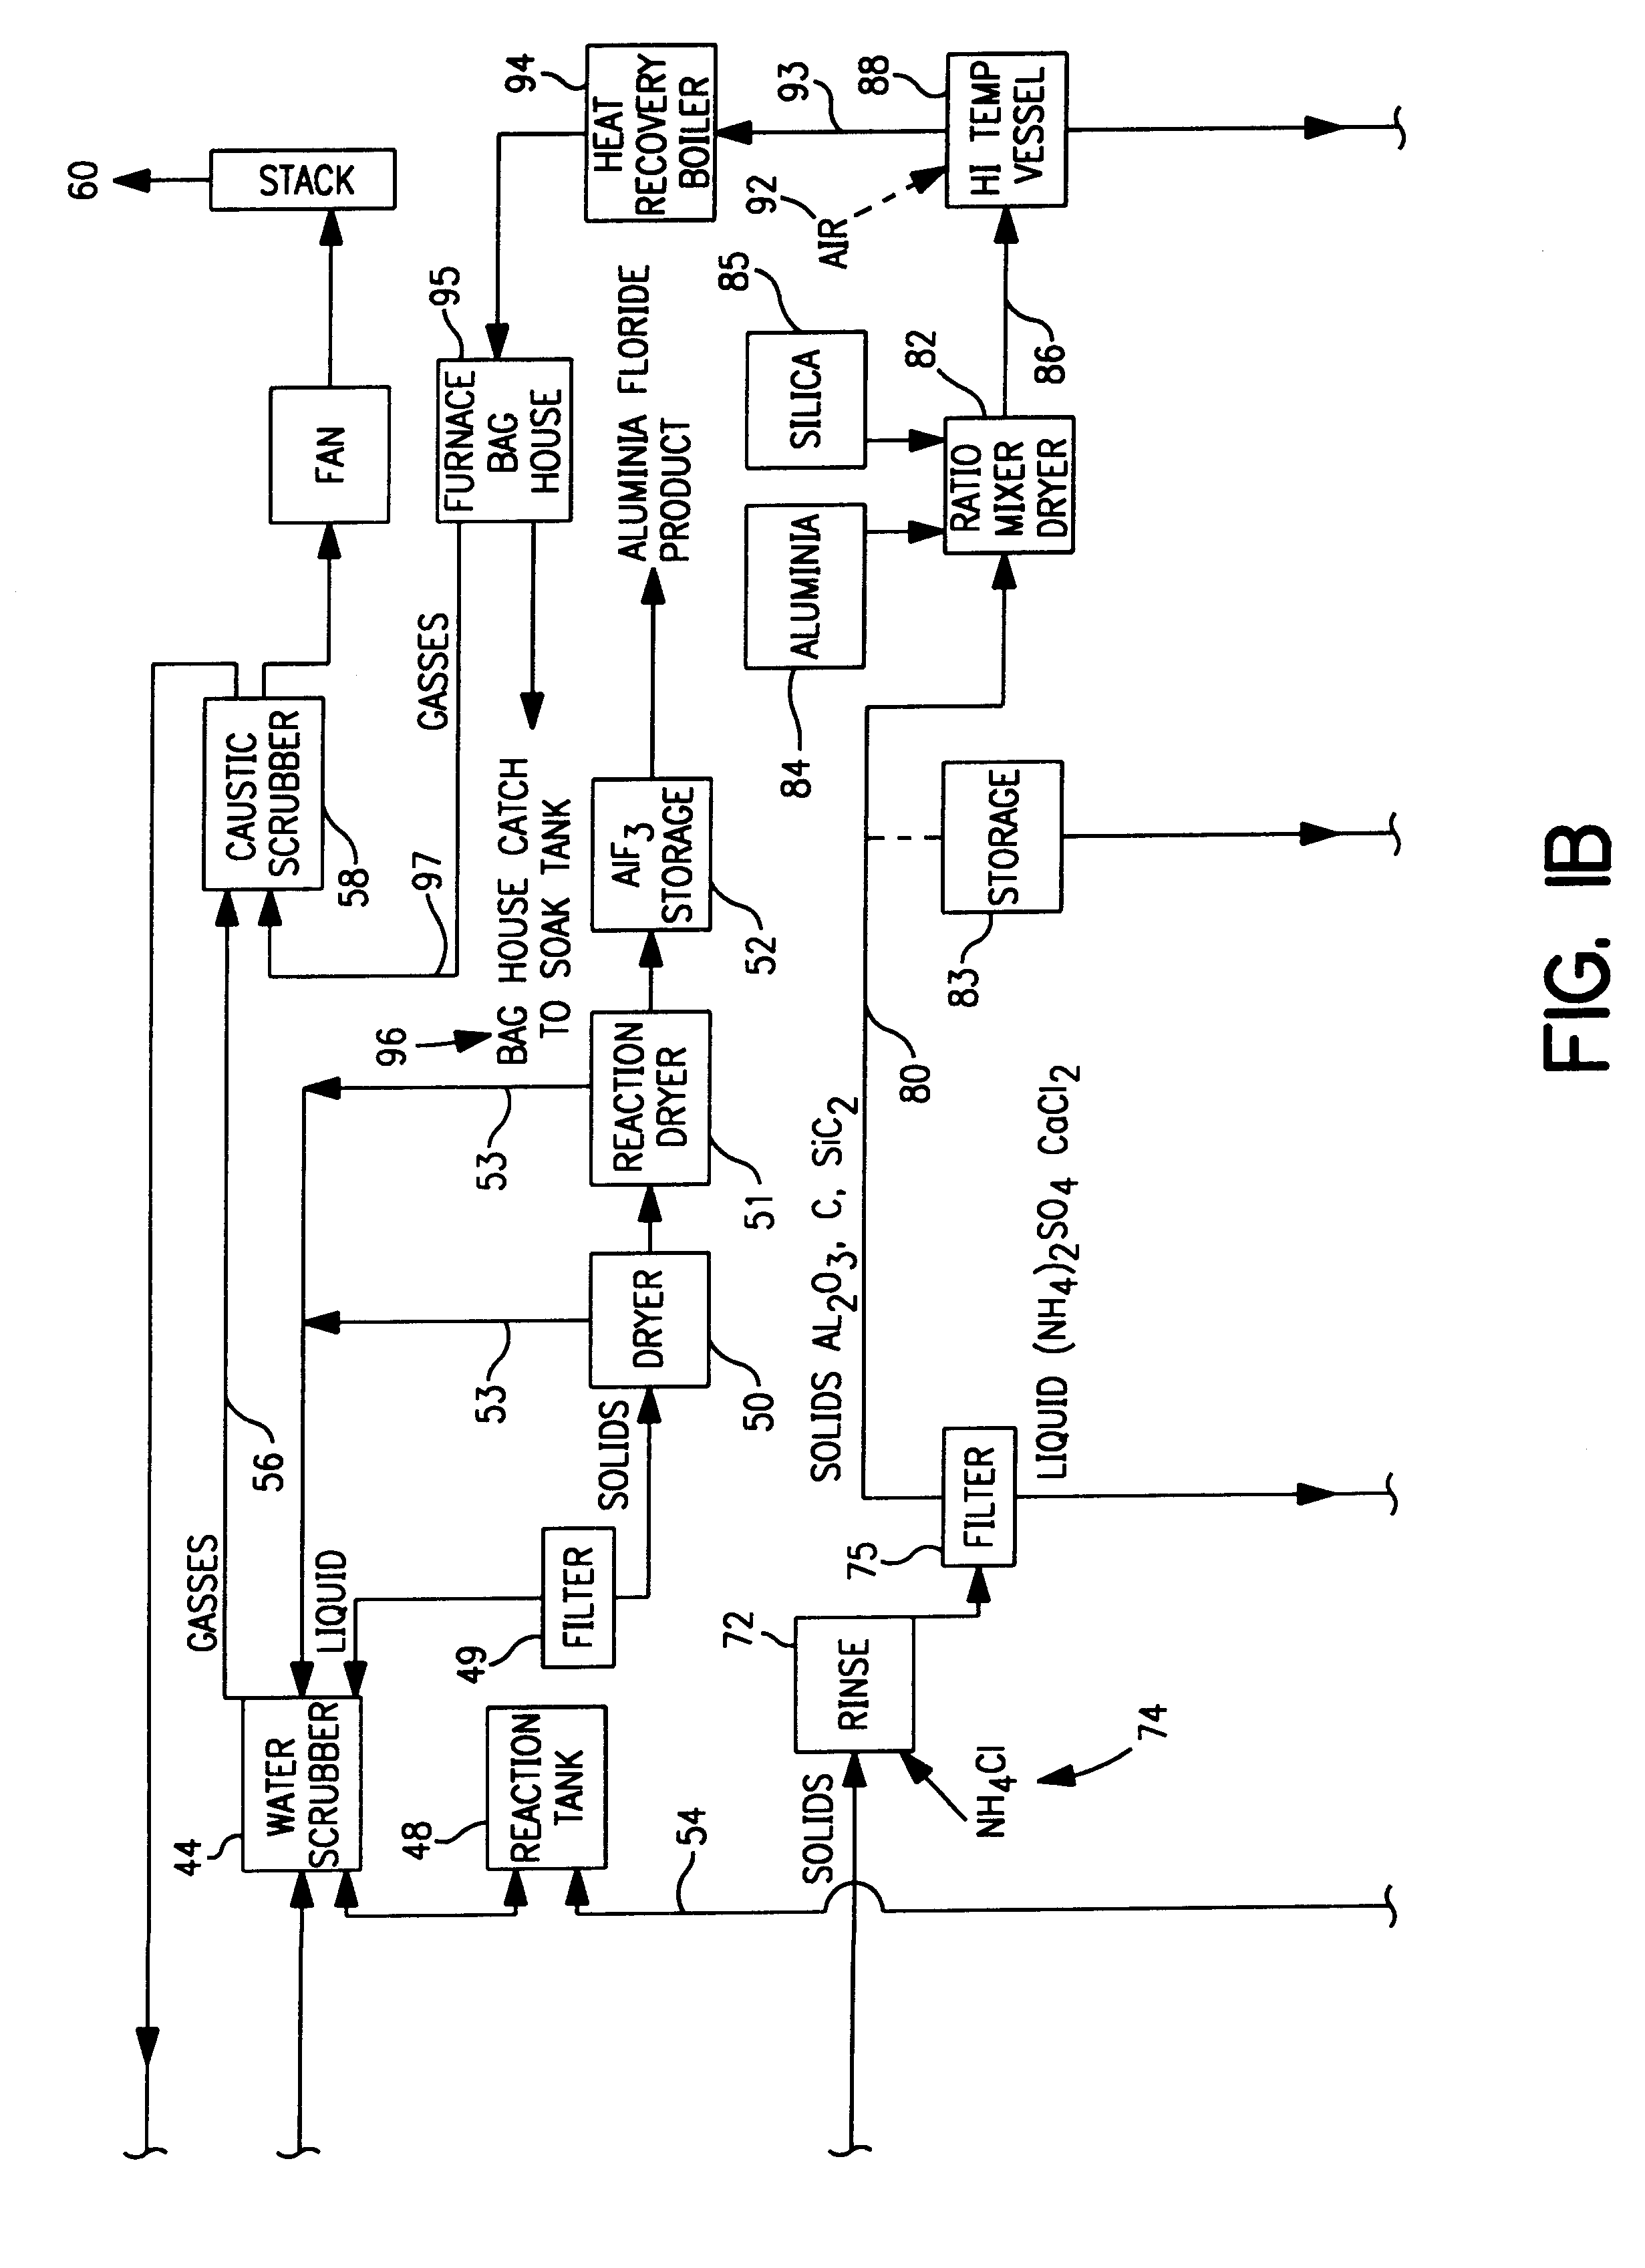 Method of recovering fumed silica from spent potliner